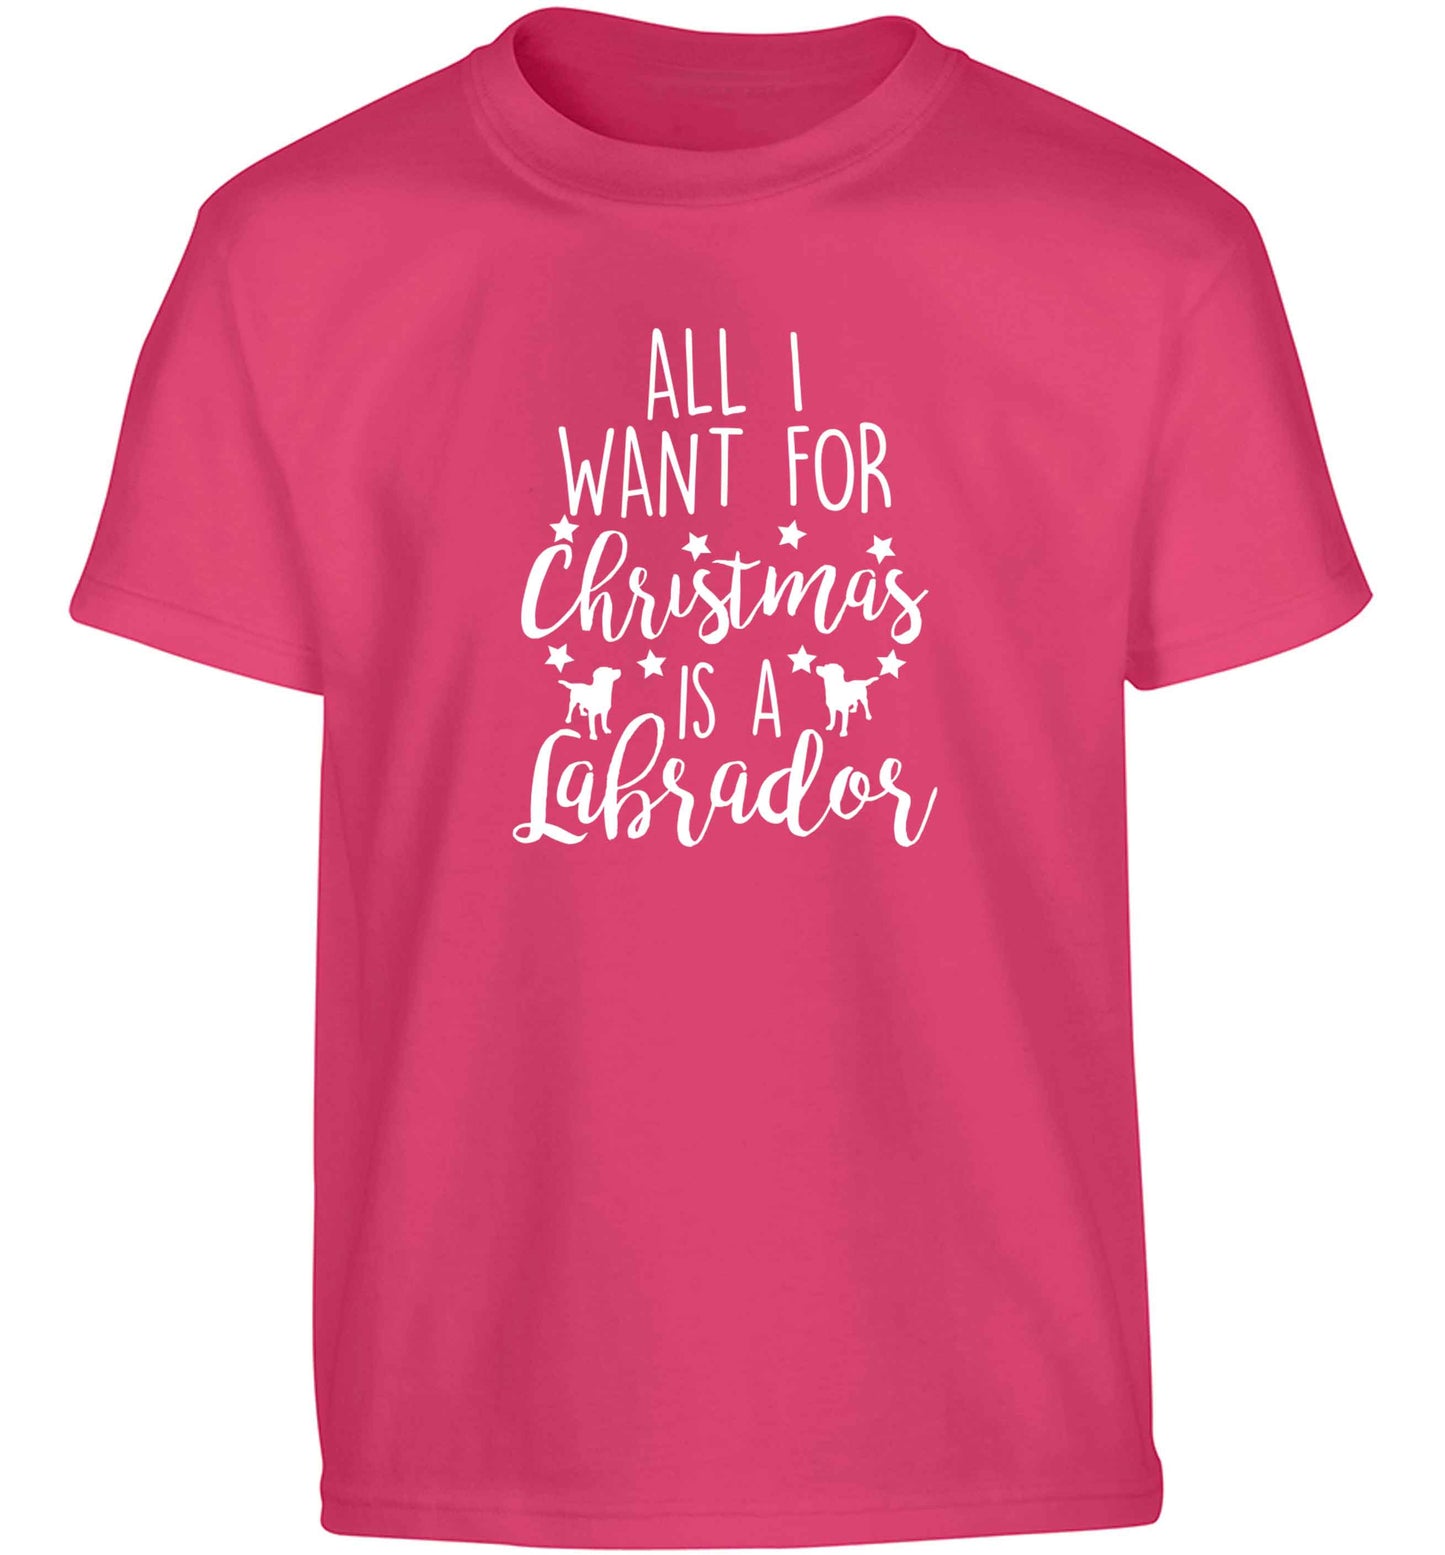 All I want for Christmas is a labrador Children's pink Tshirt 12-13 Years